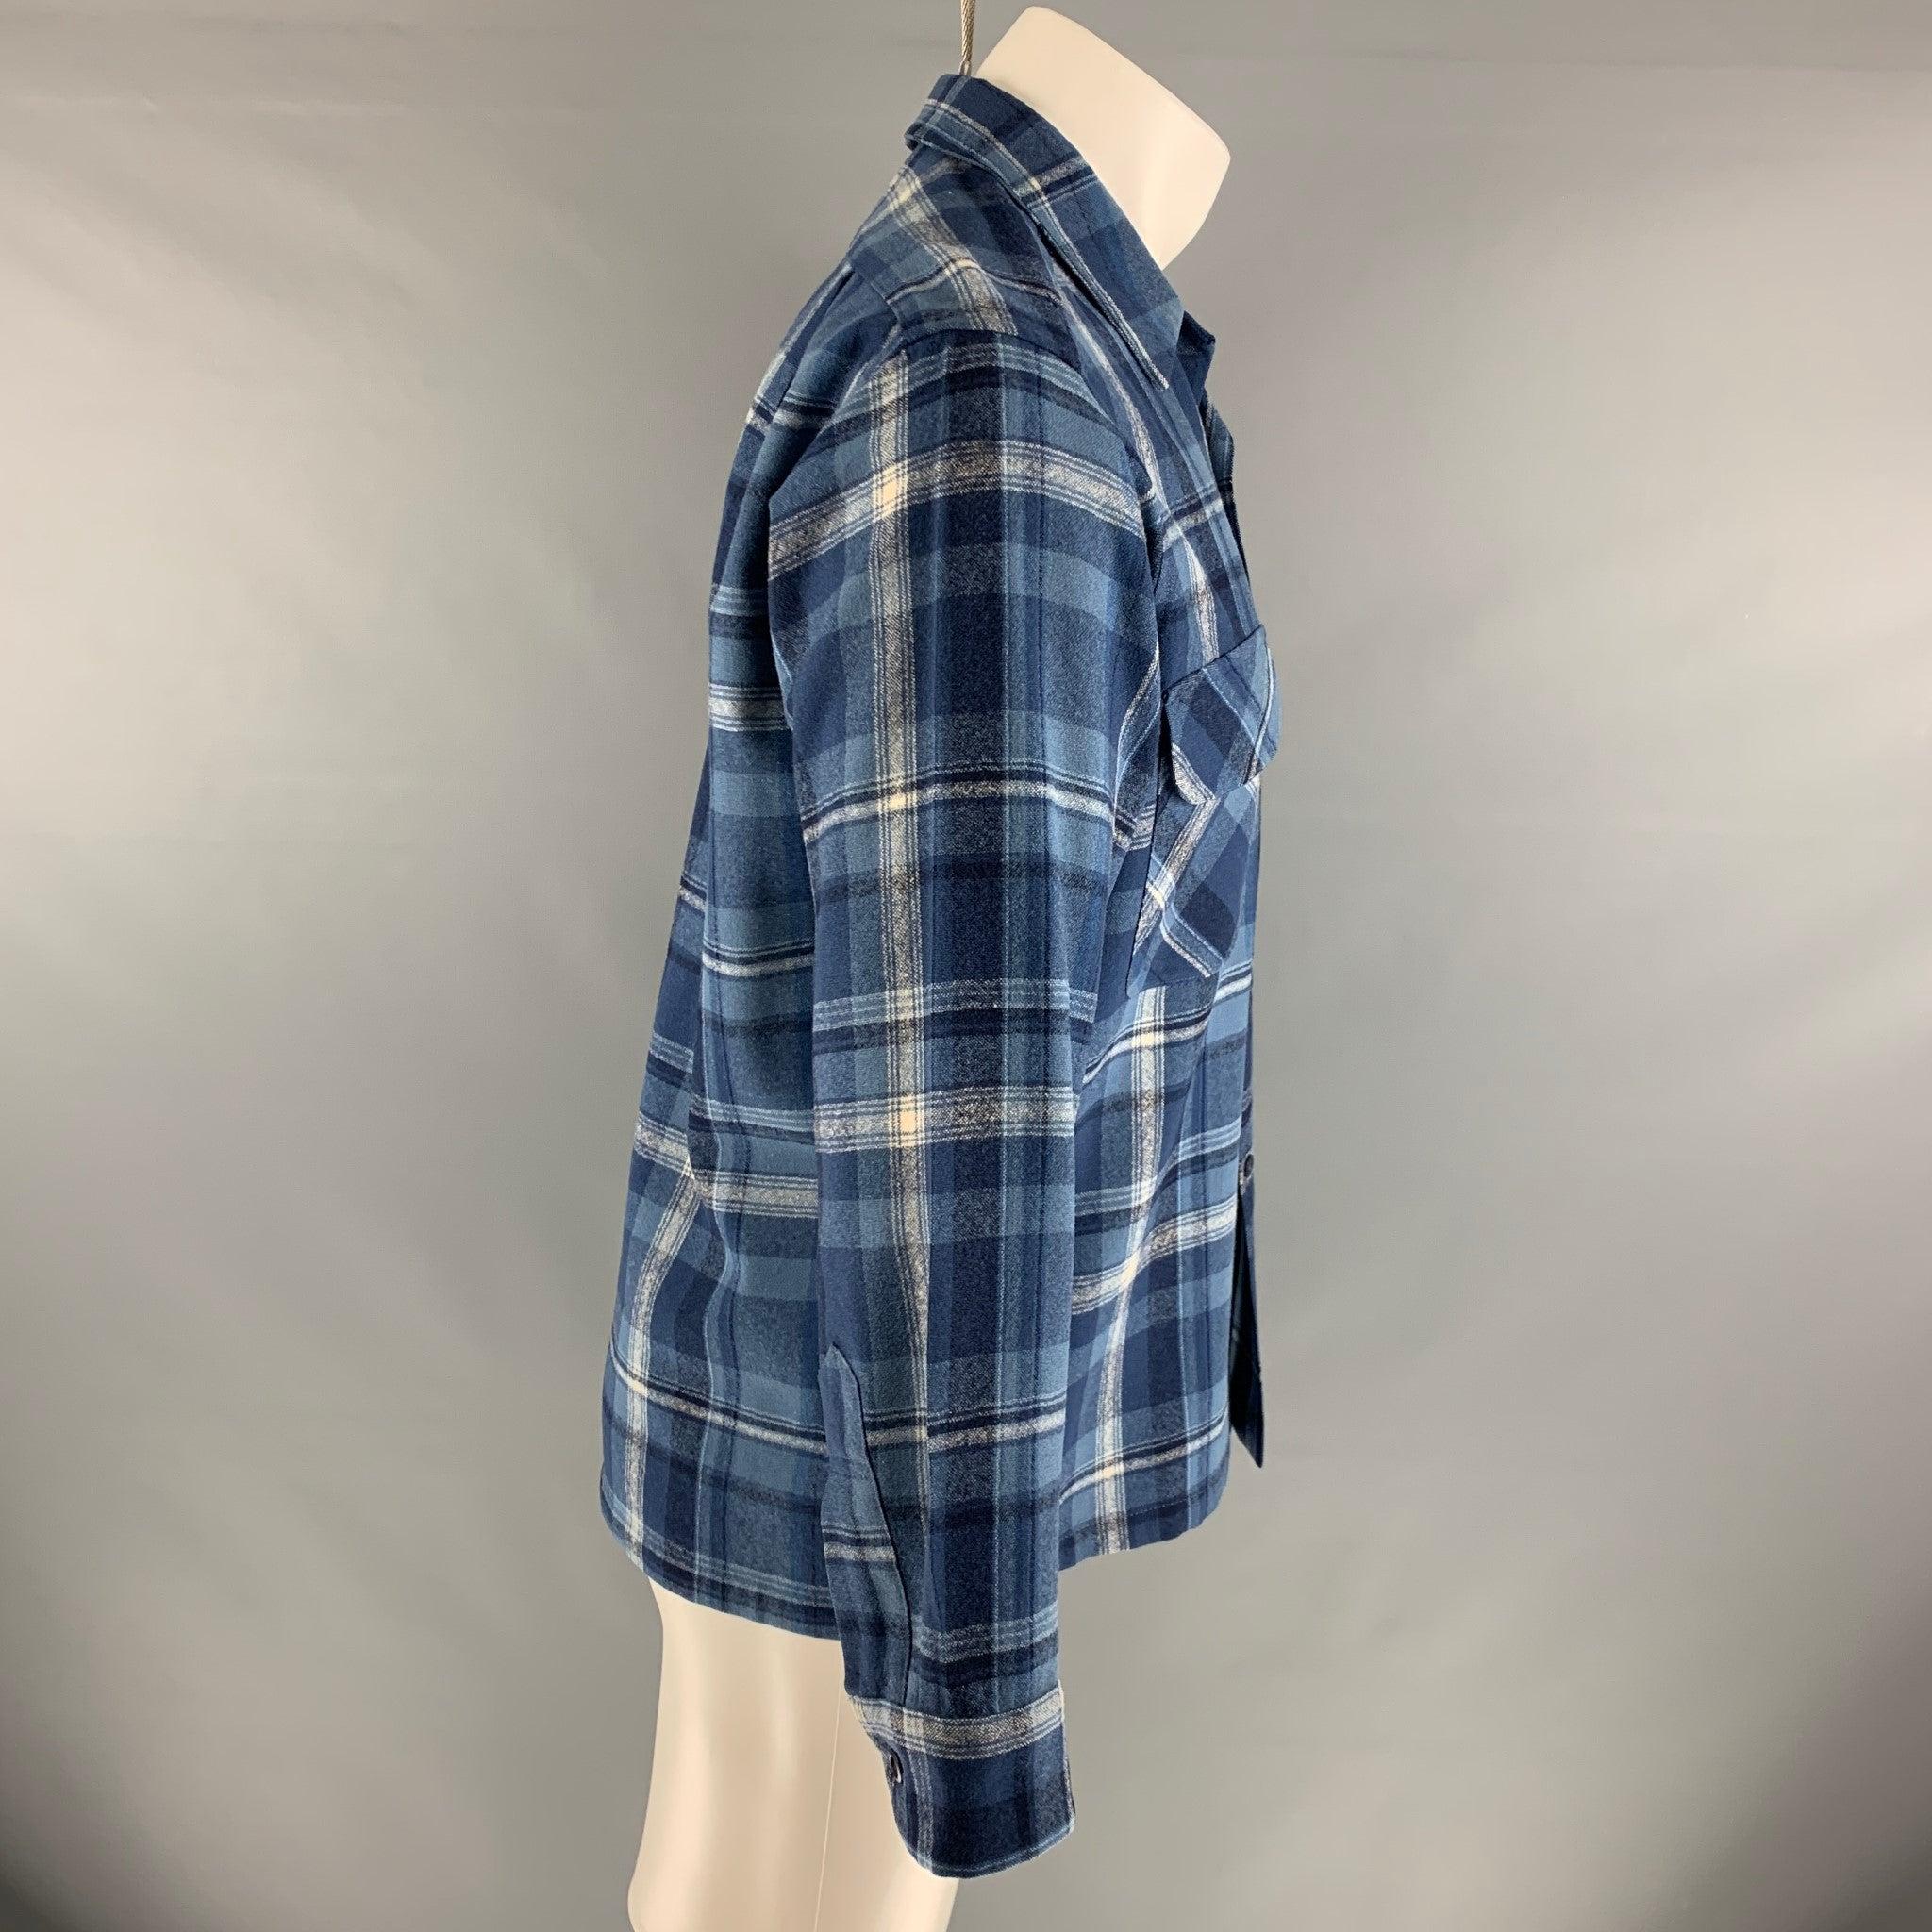 PENDLETON long sleeve shirt comes in 100% virgin wool, featuring patch pockets, a button snap closure, and a blue plaid design.Very Good Pre-Owned Condition. 

Marked:   M 

Measurements: 
 
Shoulder: 18 inches Chest: 42 inches Sleeve: 22 inches